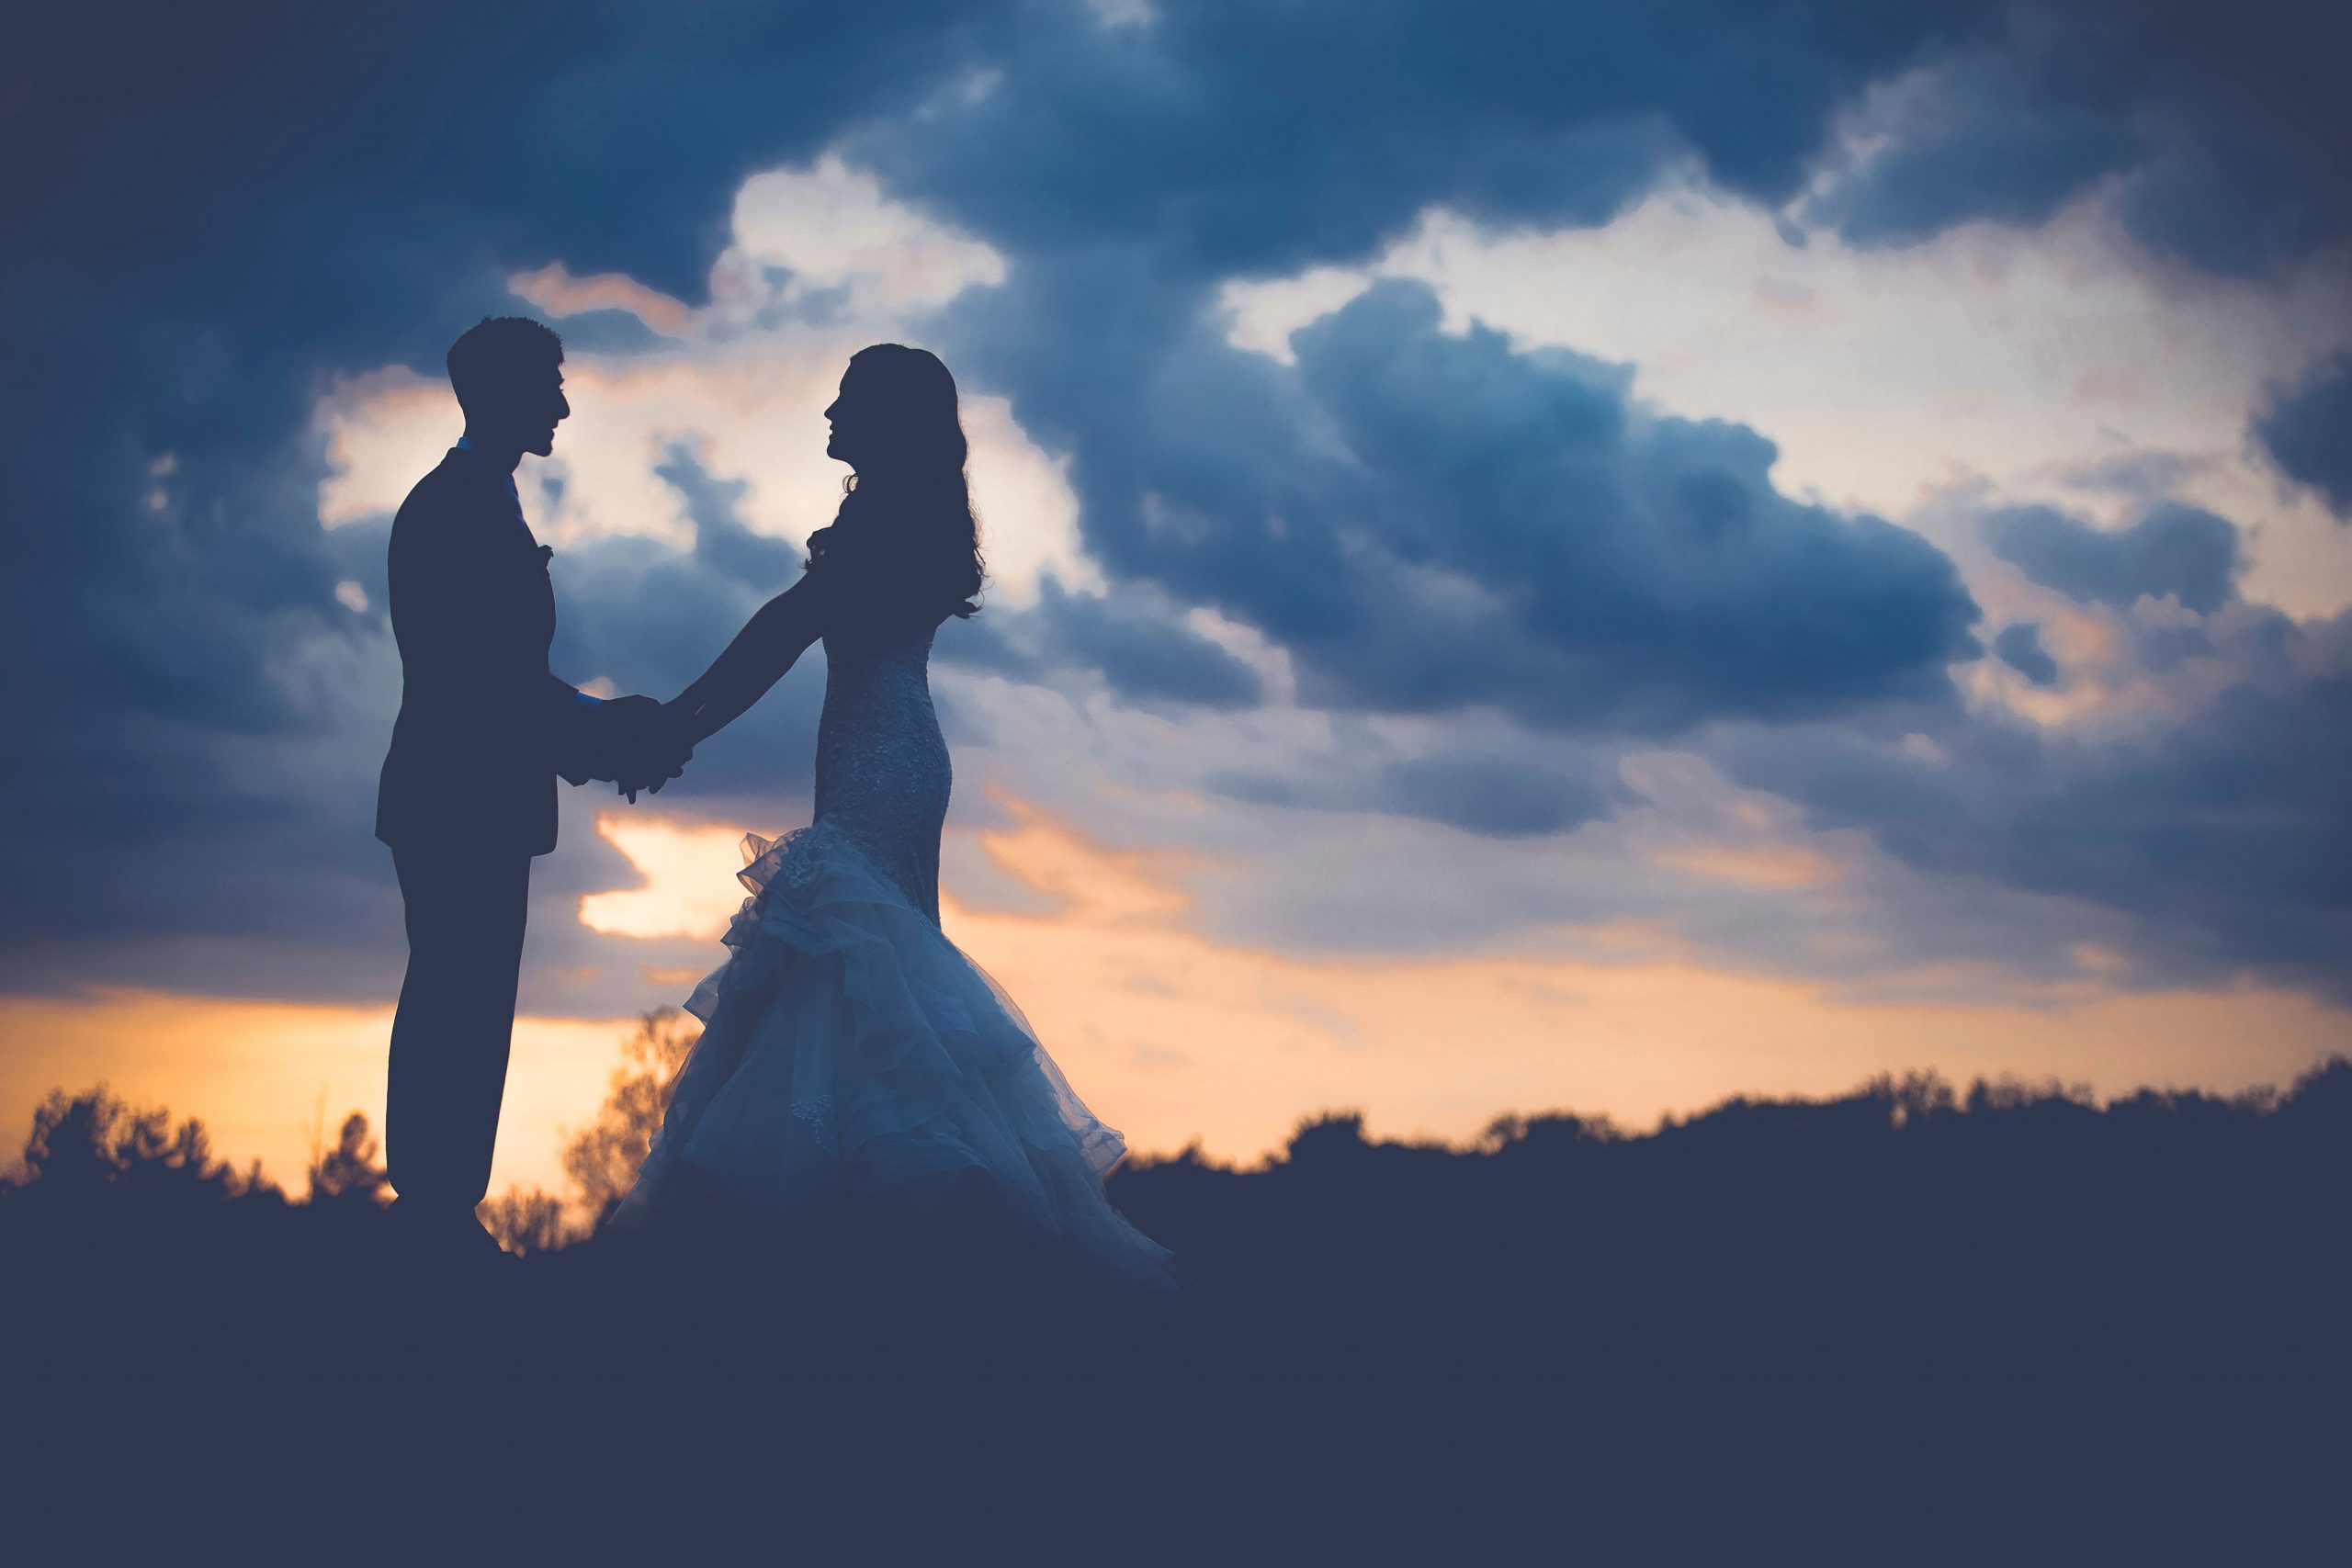 Silhouette of man and woman standing during sunset wallpaper